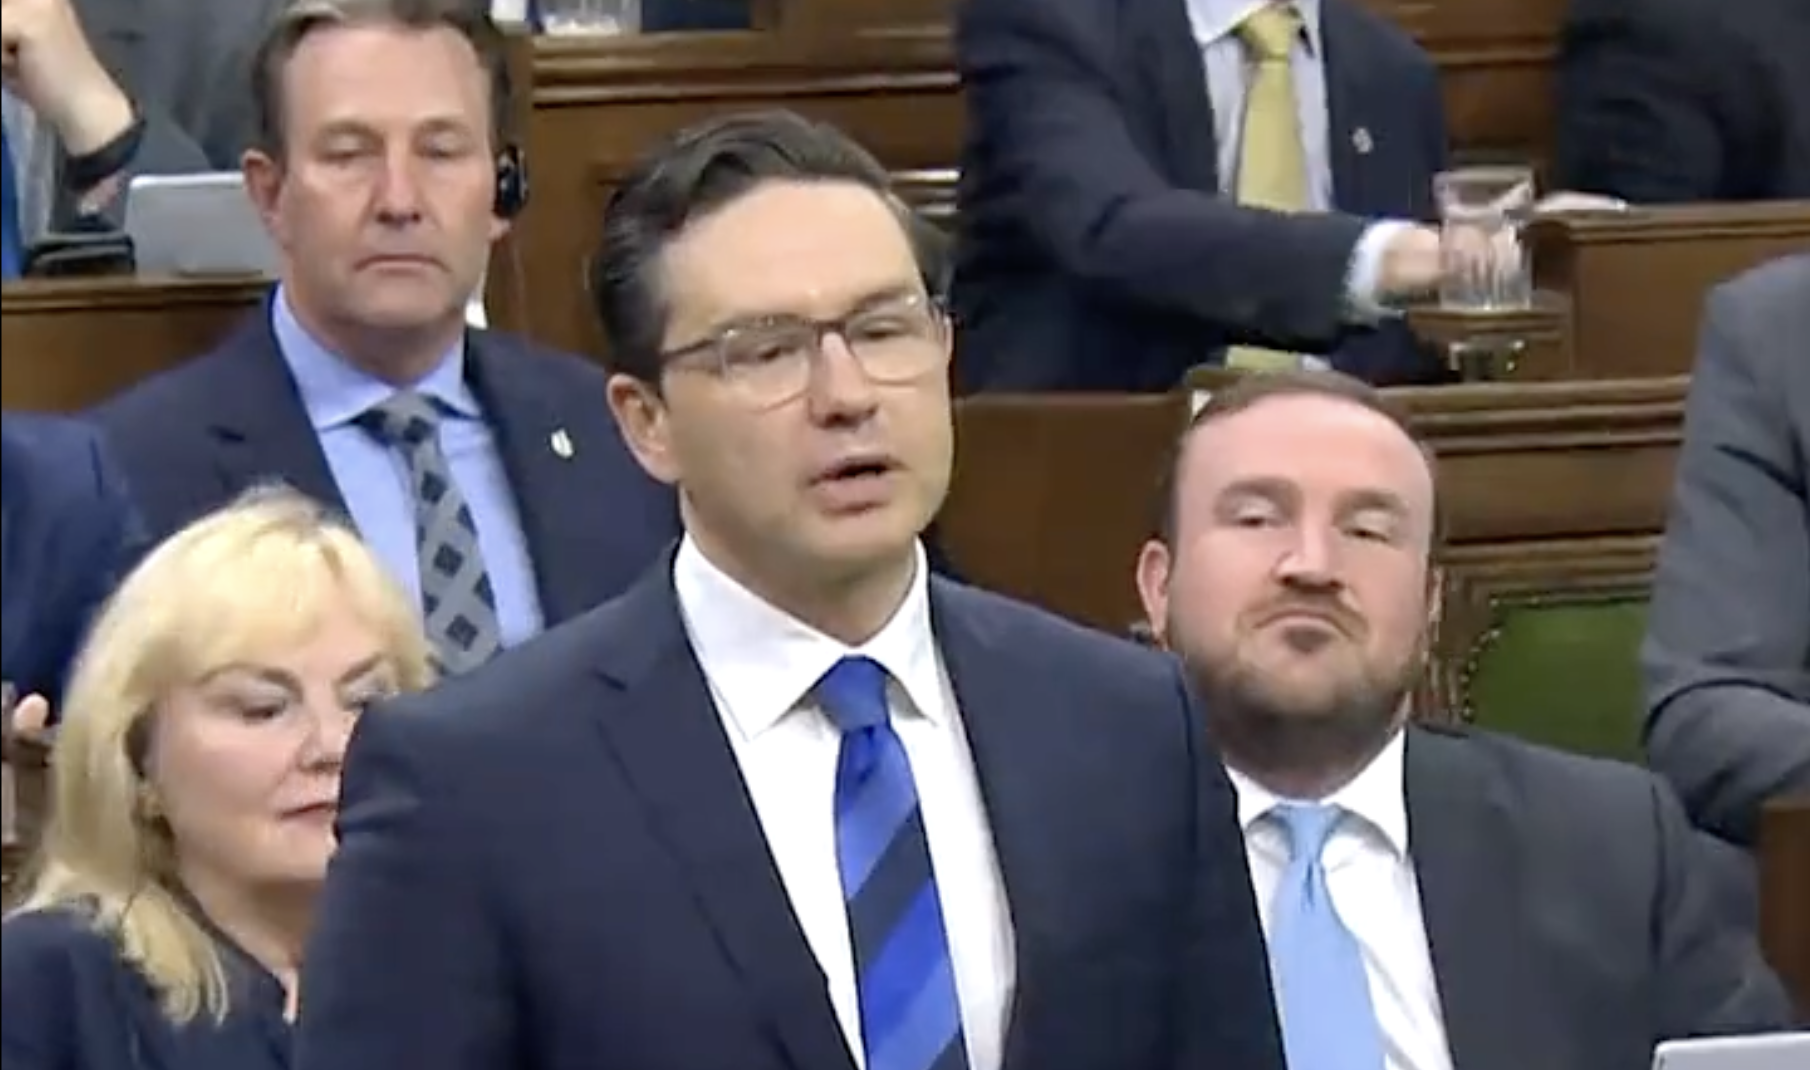 Poilievre’s Early Favourability Rating Lowest Among Recent Conservative Leaders – Does that Matter to Him?